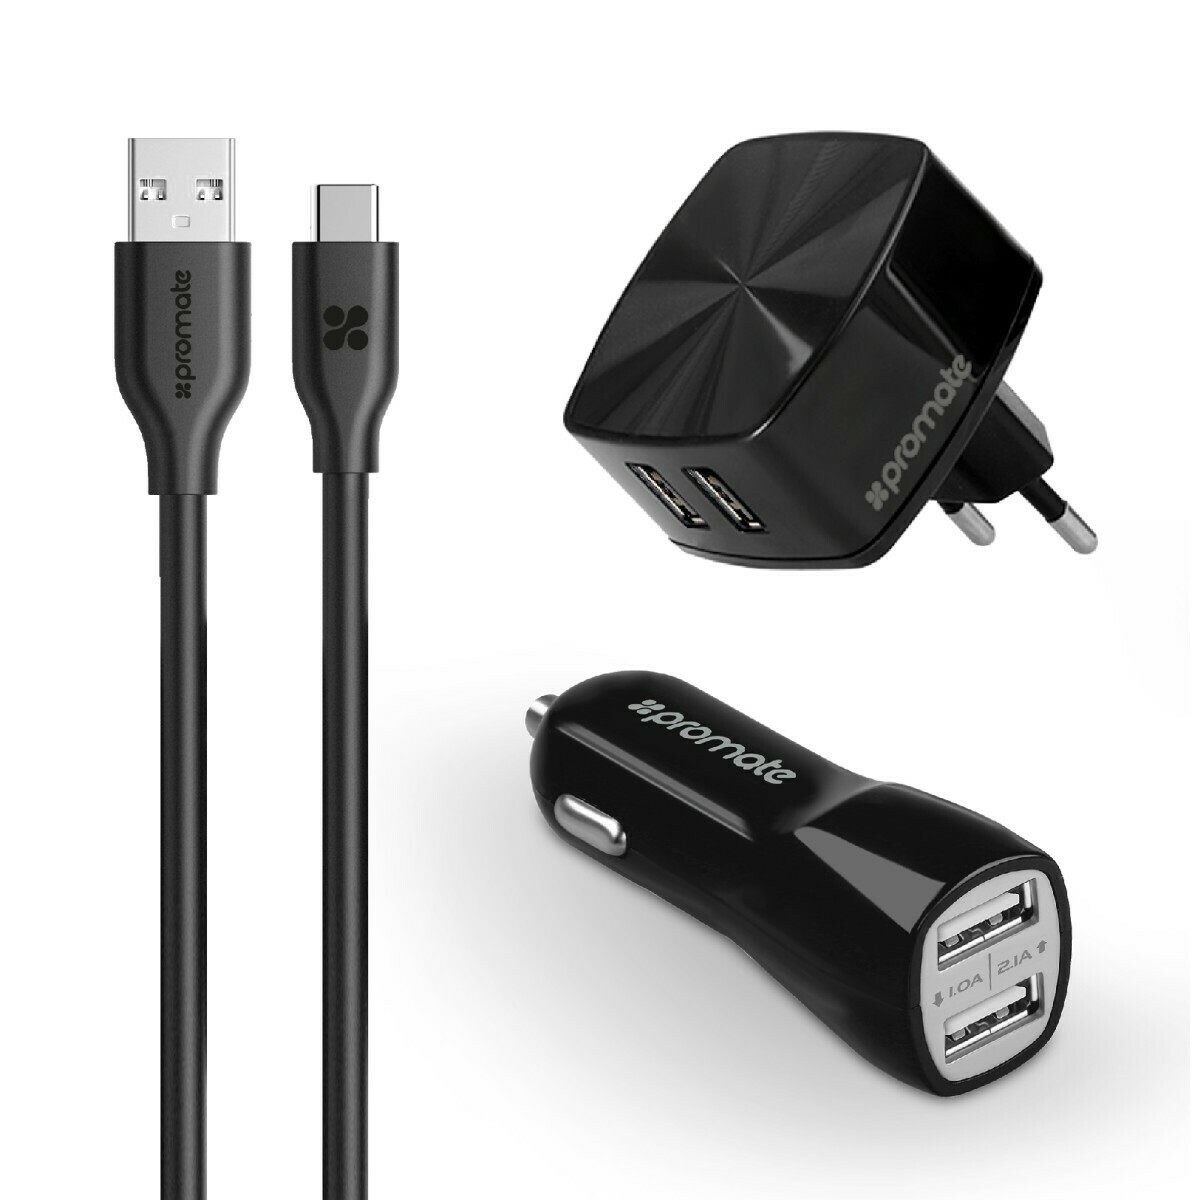 PROMATE UniCharger Ultra-fast 3-in-1 Charging Kit for USB-C Devices